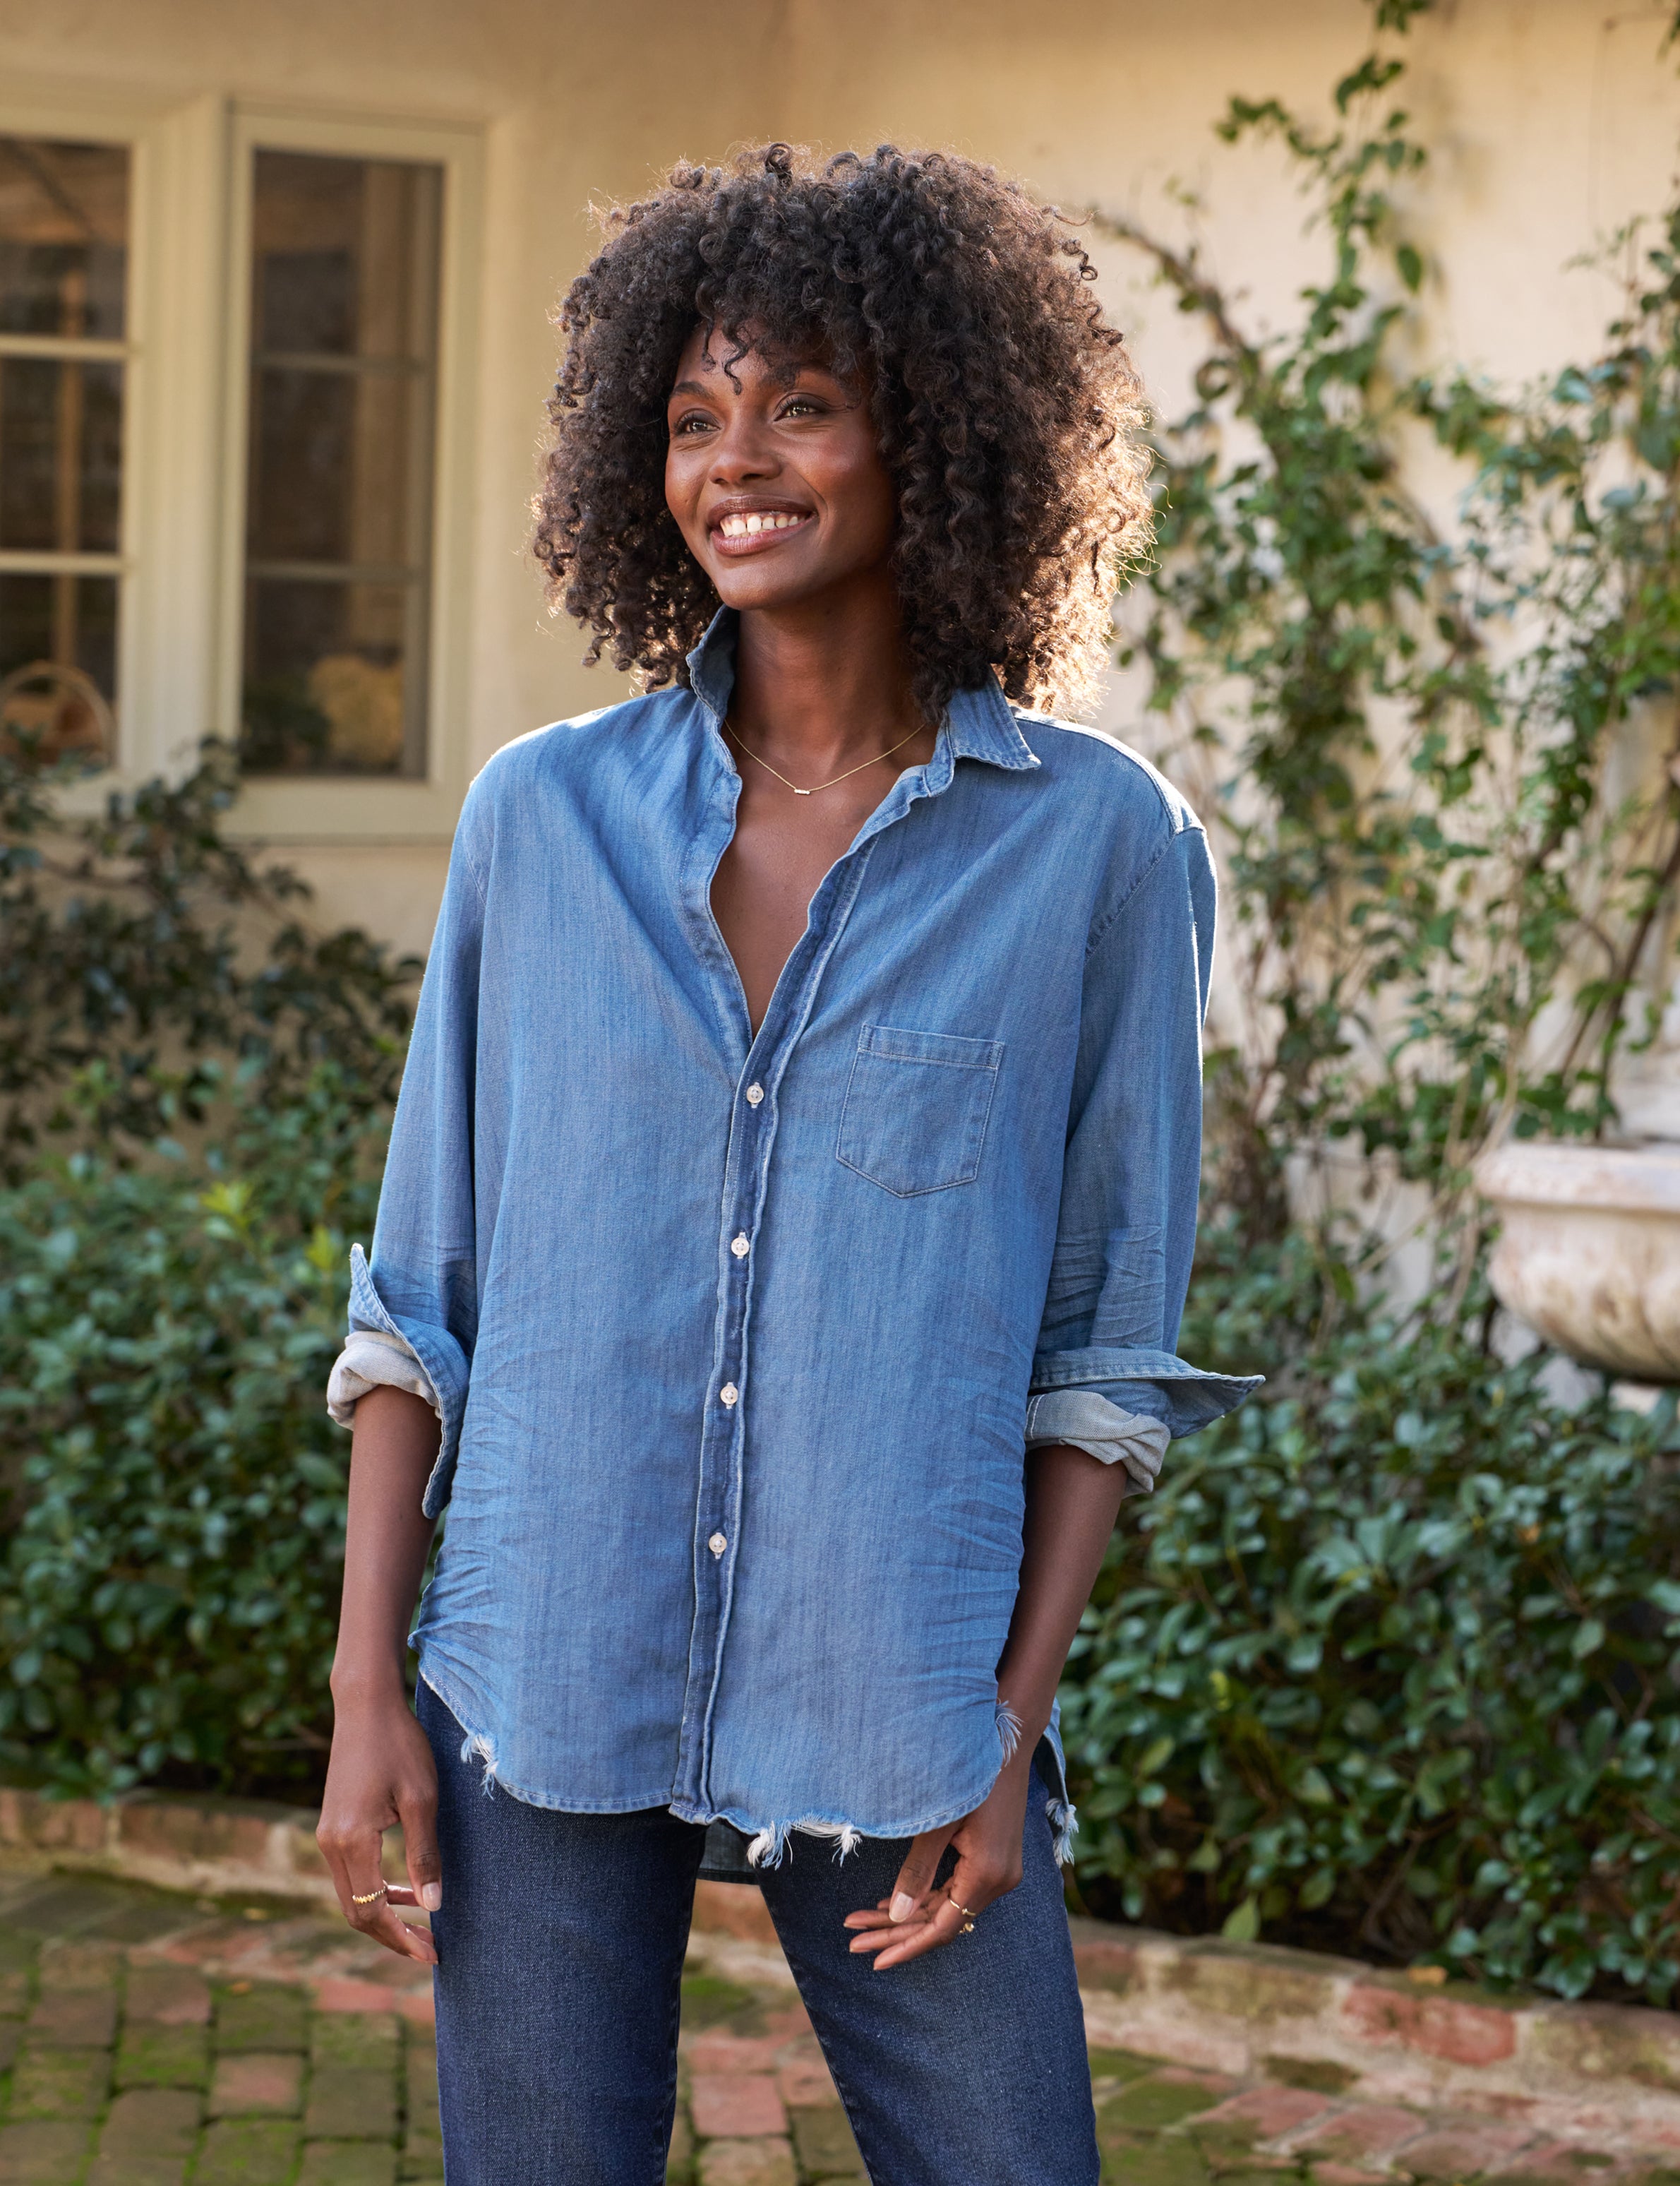 Frank & Eileen, Eileen Relaxed Button Up Woven Shirt - Stone-Washed Indigo  Flushed